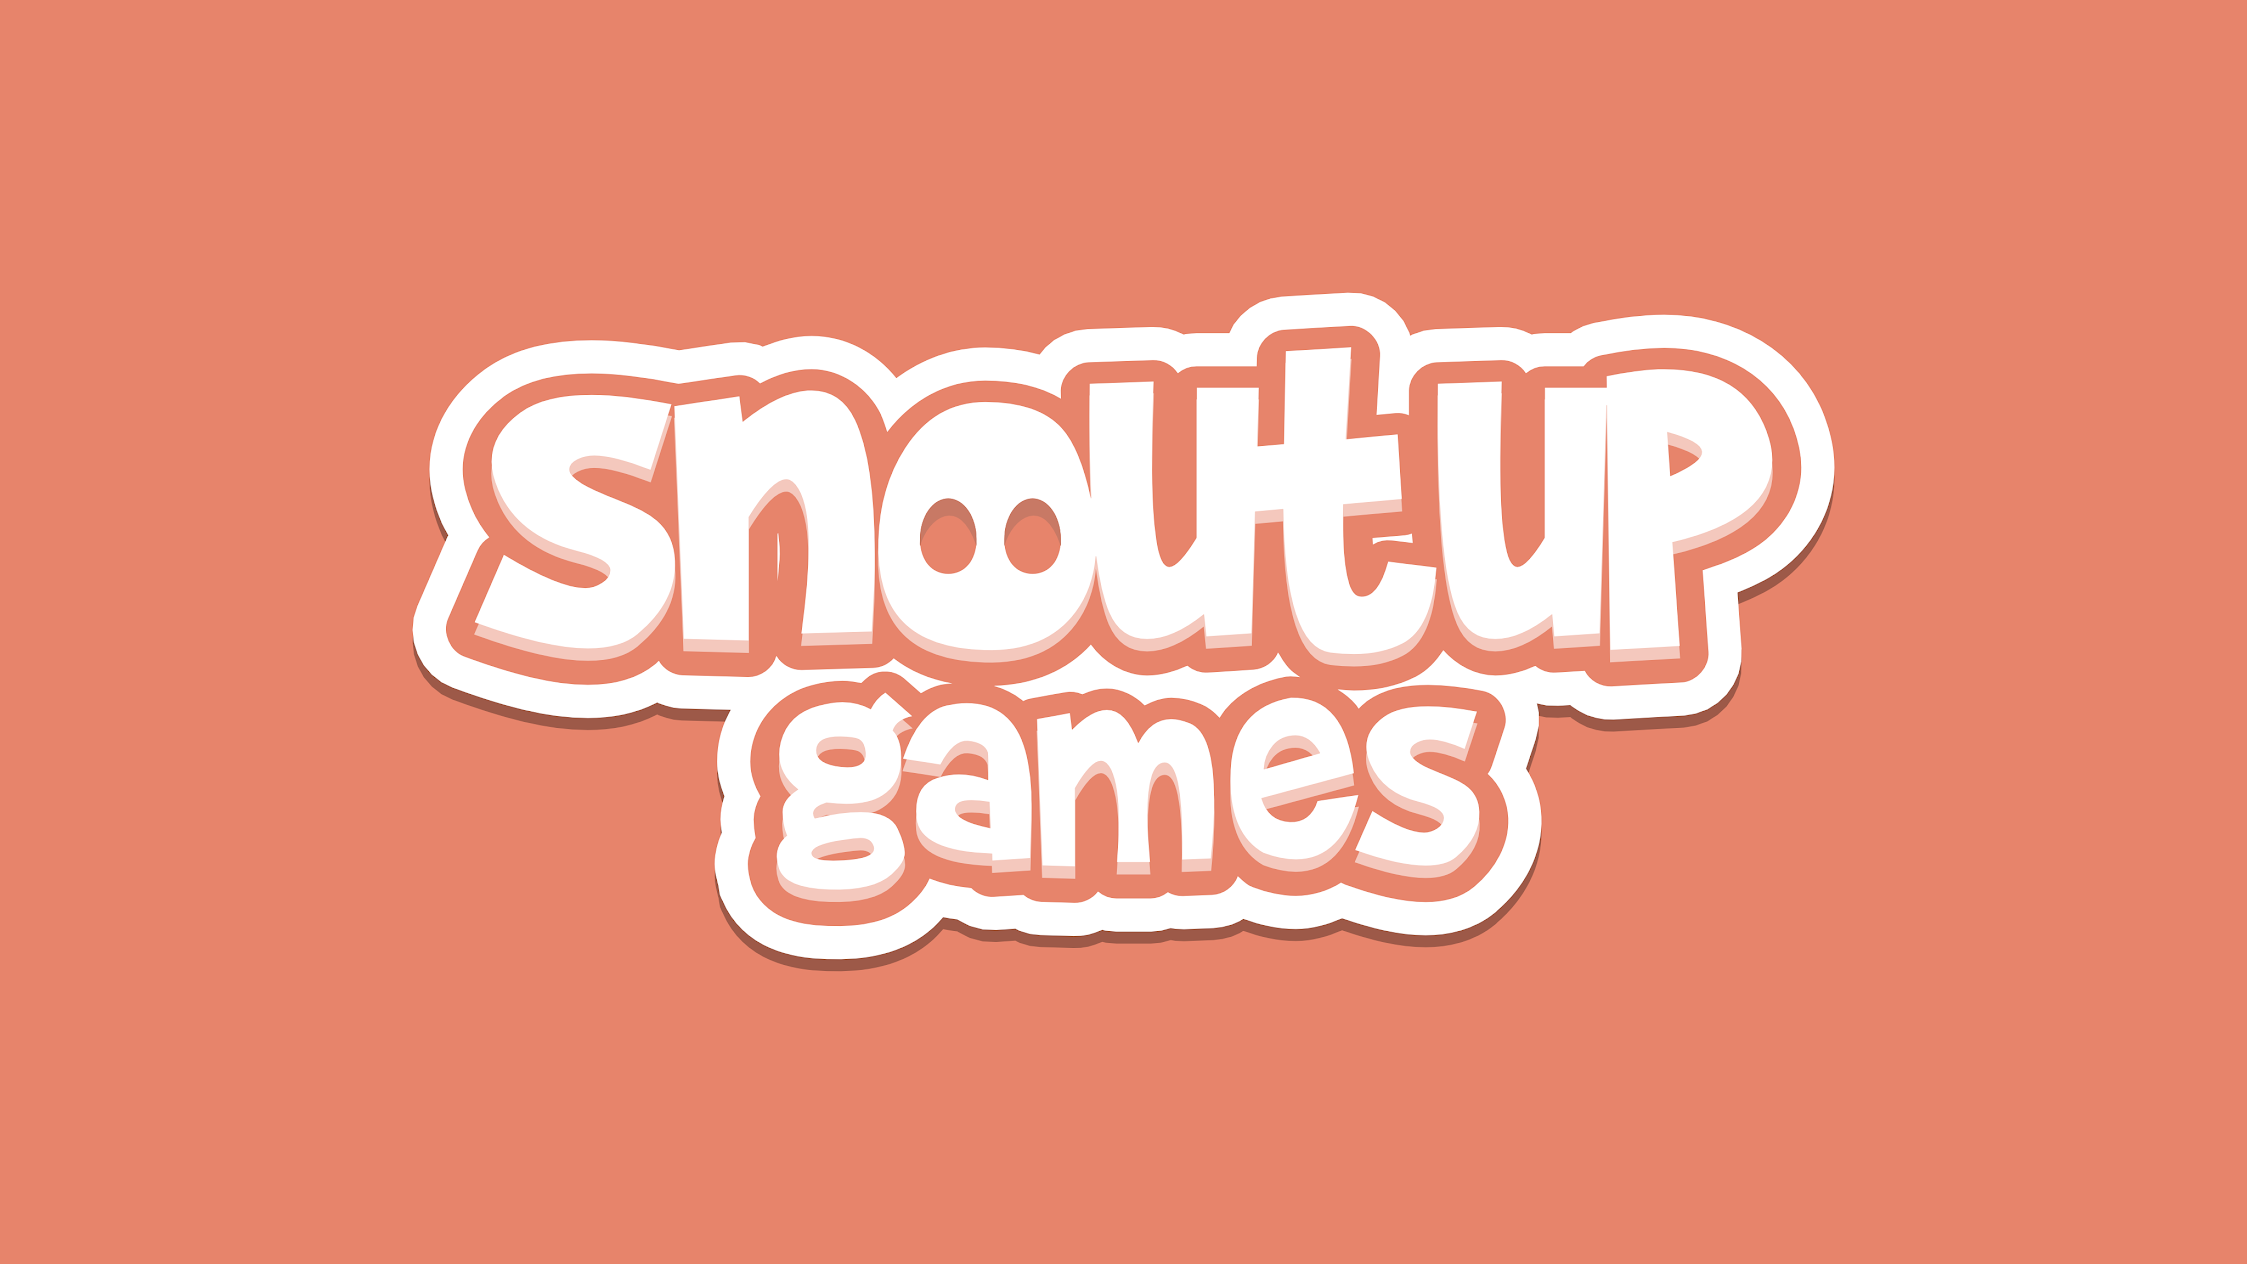 SnoutUp Games